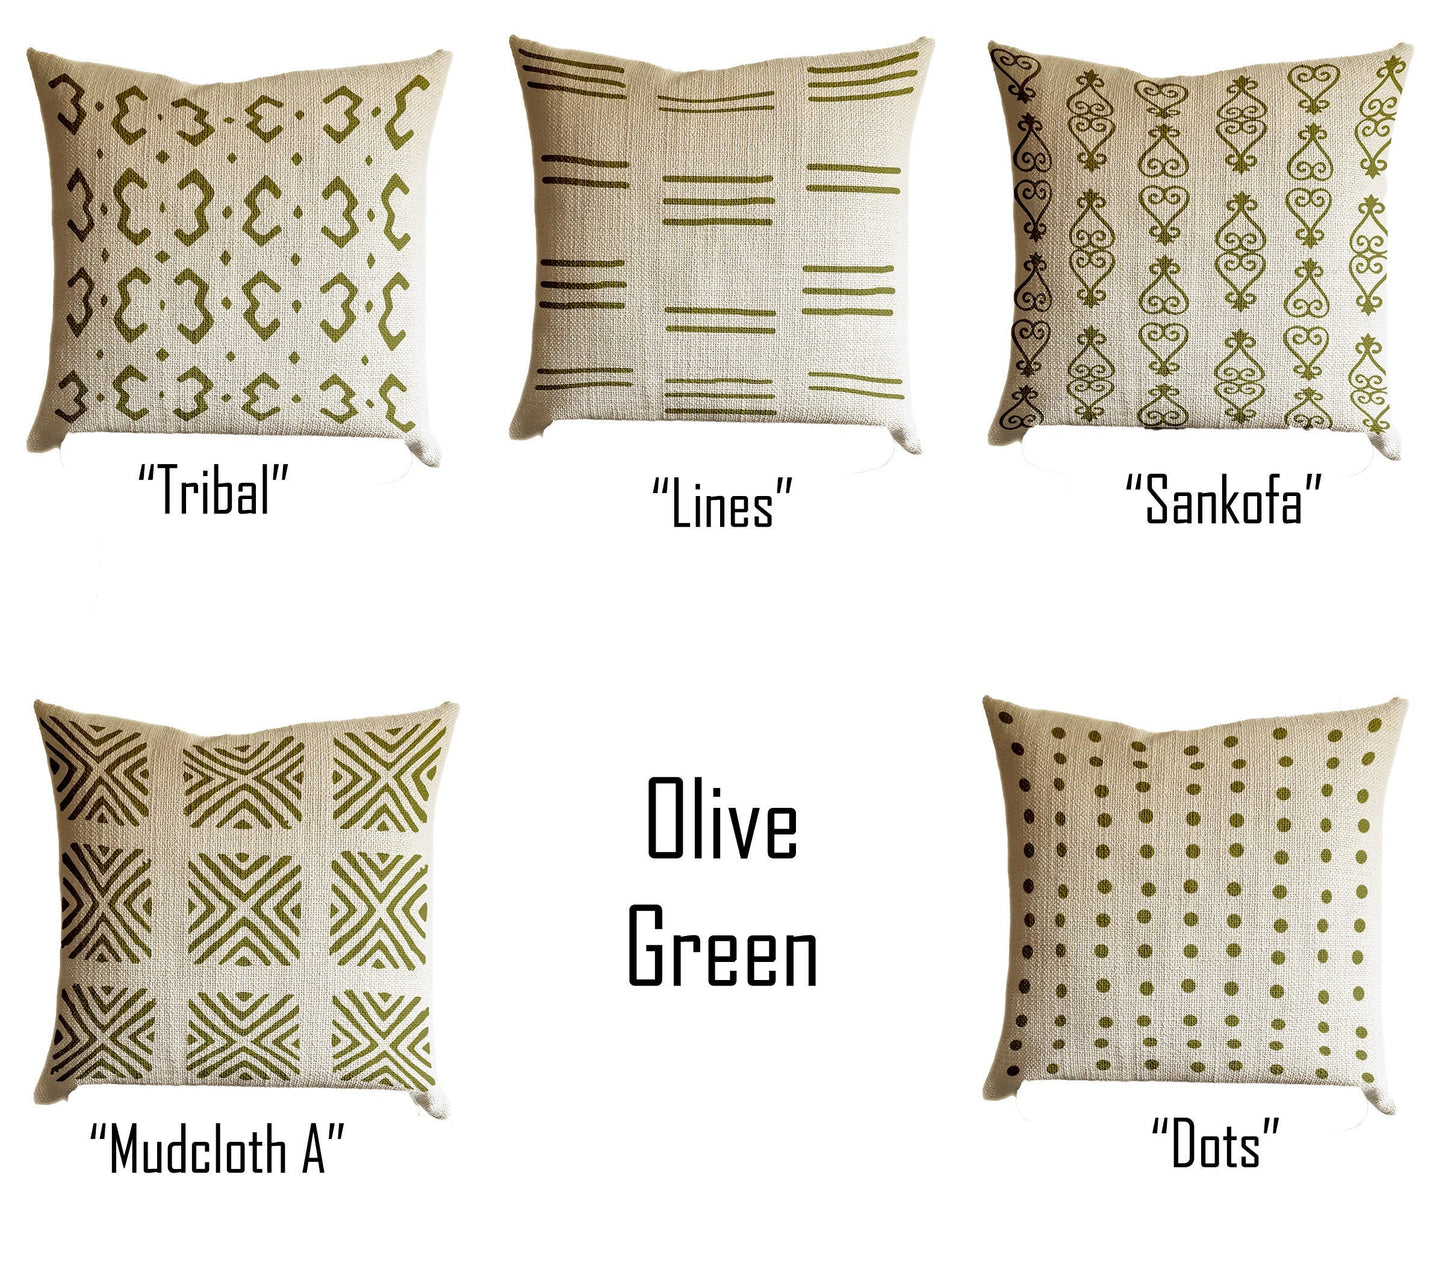 Moss Olive Green Pillow Cover, Tribal Urban Ethnic Square 18x18 in Natural Oatmeal Color Textured Woven Fabric in Modern Boho Home Decor